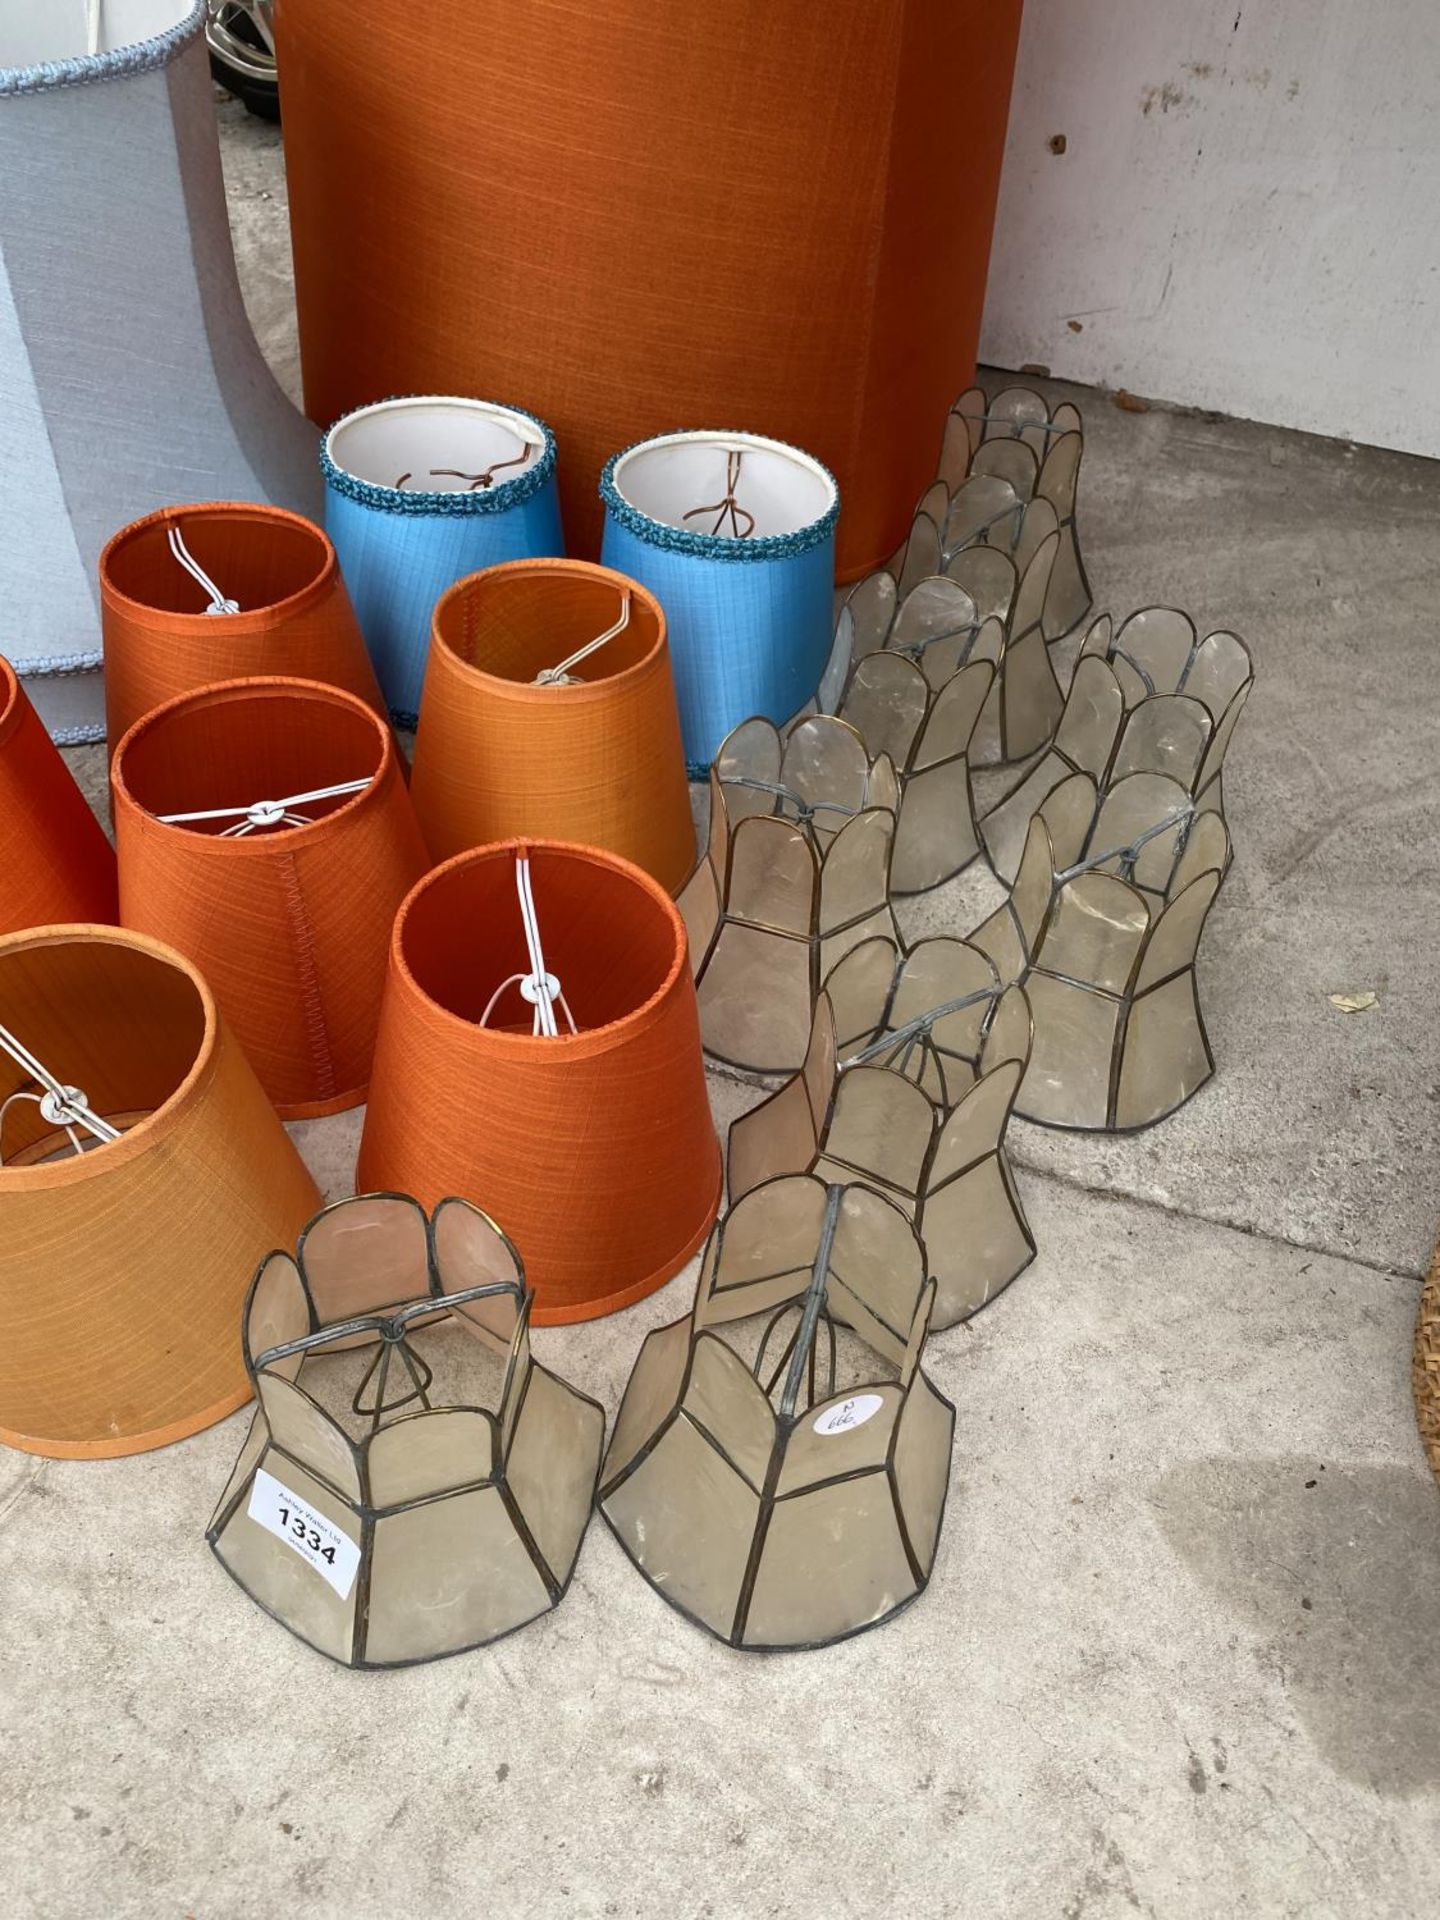 A LARGE QUANTITY OF VARIOUS LAMP SHADES - Image 2 of 3